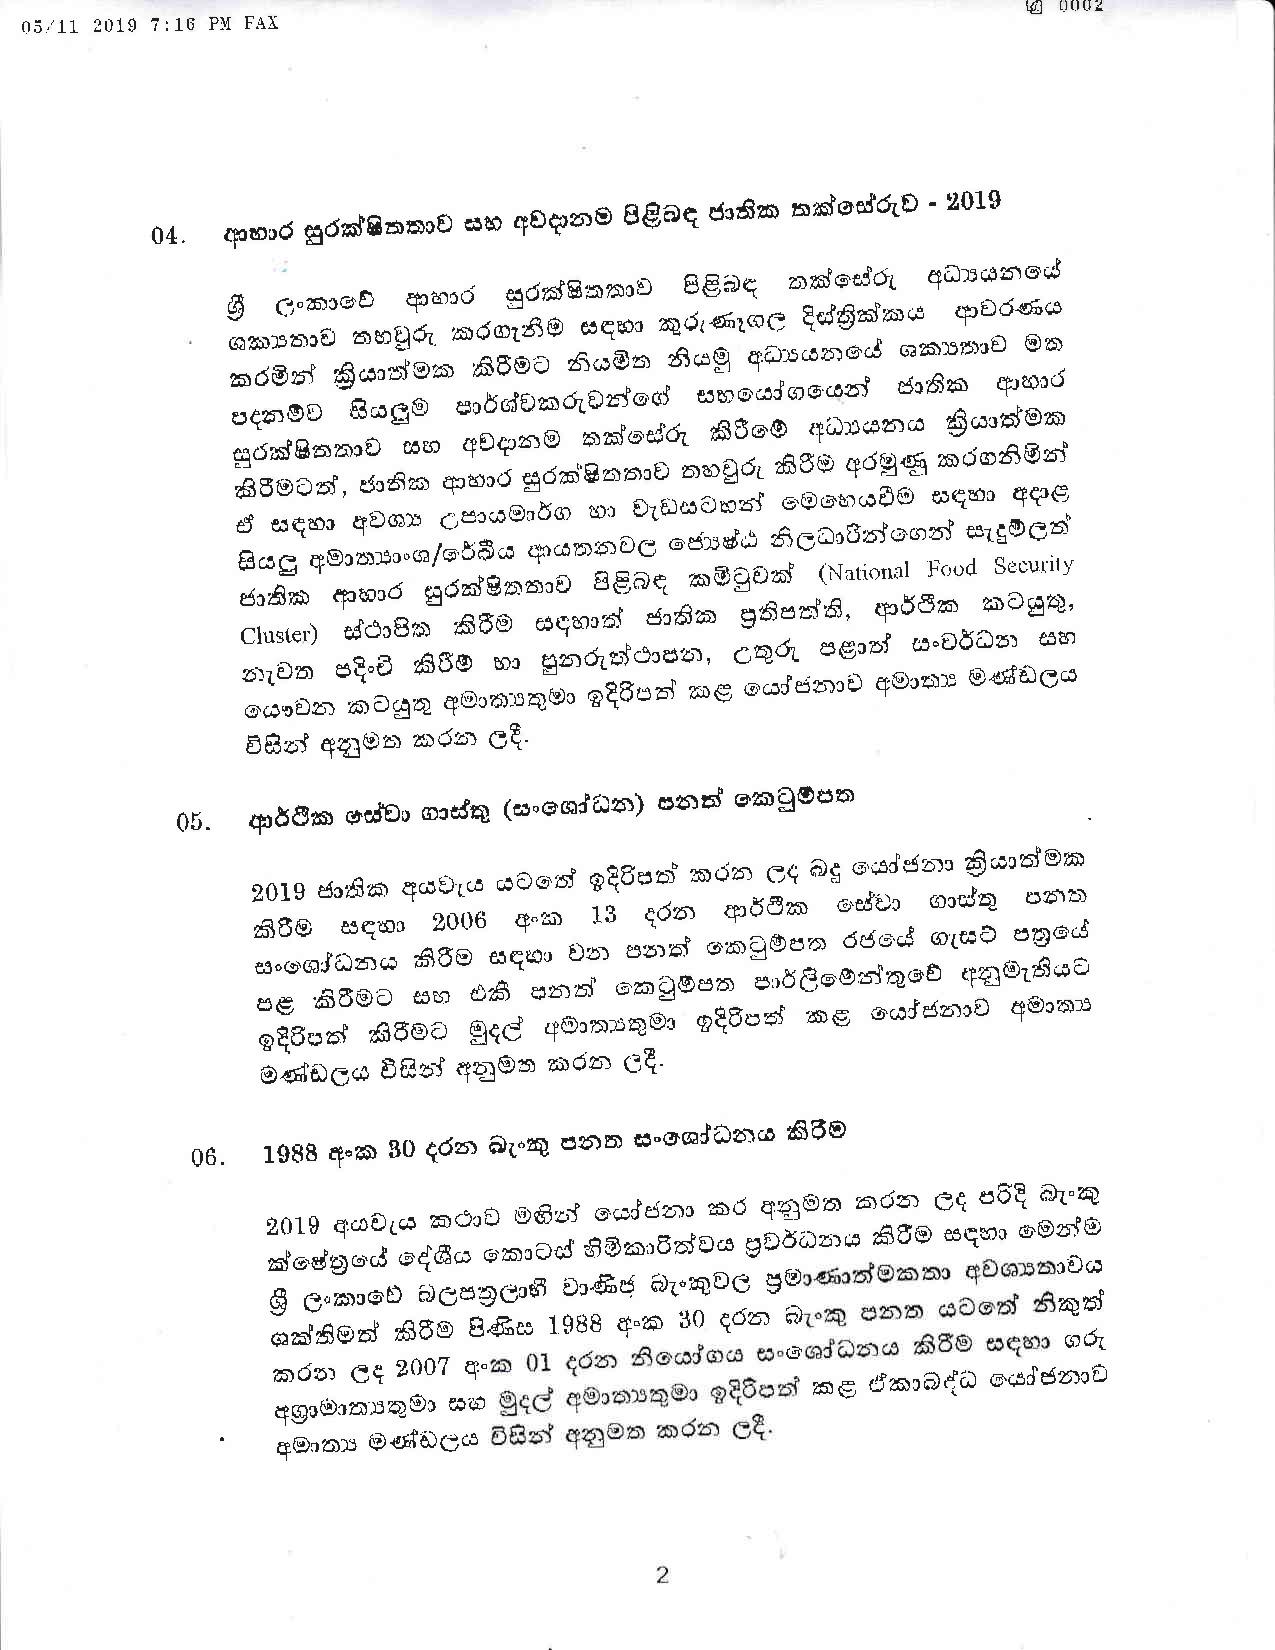 Cabinet Decision on 05.11.2019 page 002